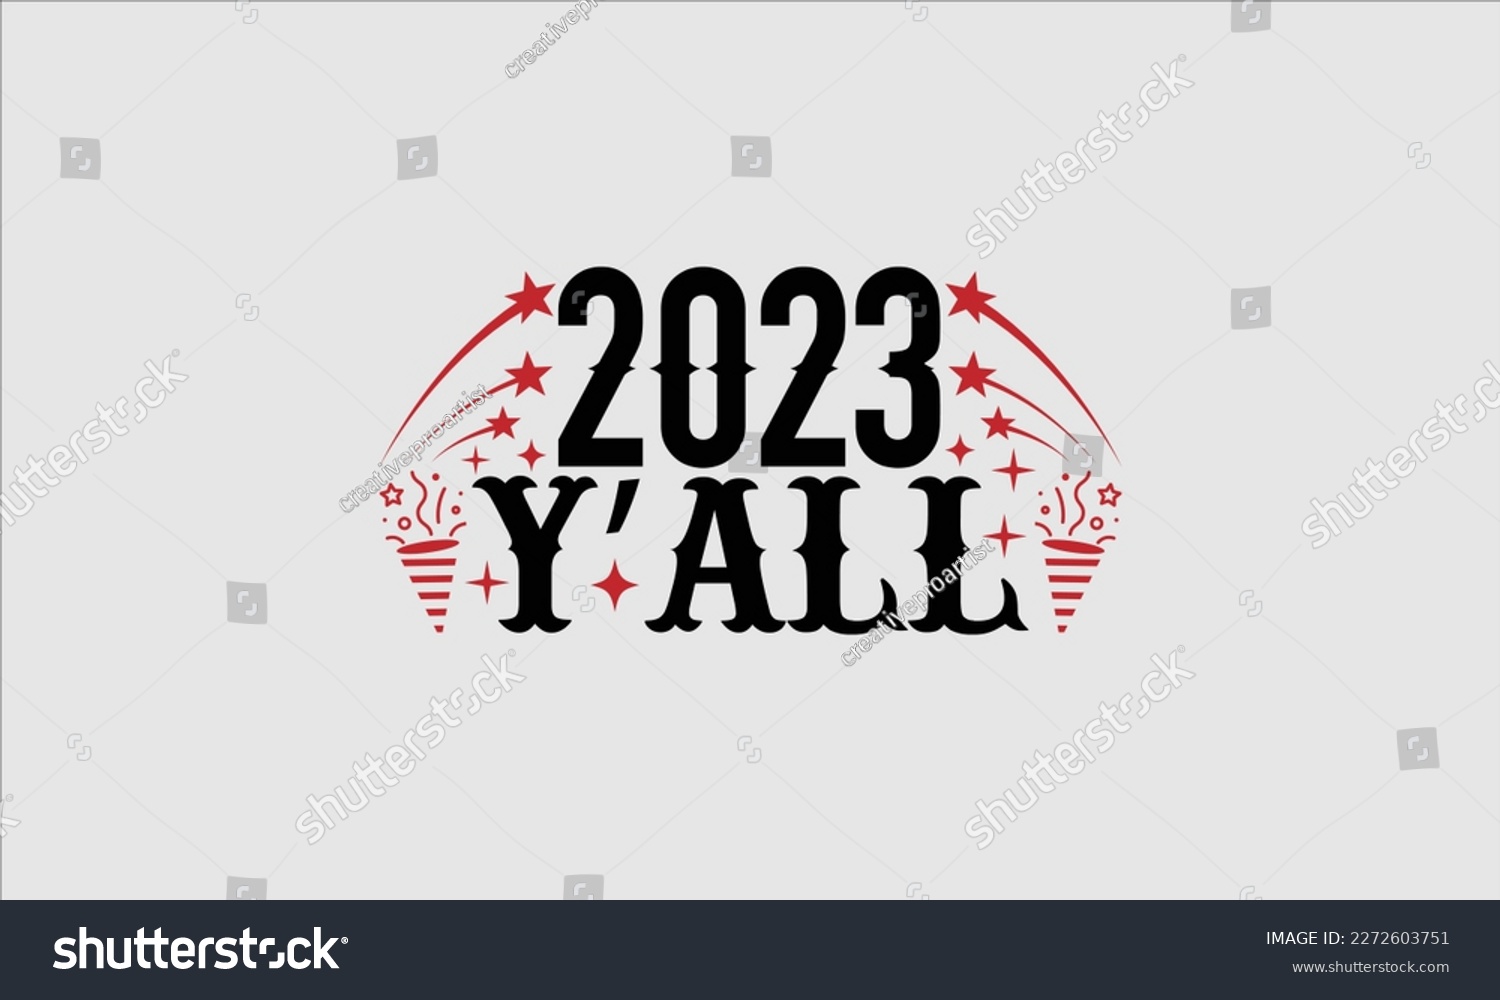 SVG of 2023 y’all- Happy New Year t shirt Design, Hand drawn vintage hand lettering, greeting card template with typography text, Isolated on white background, EPS  svg